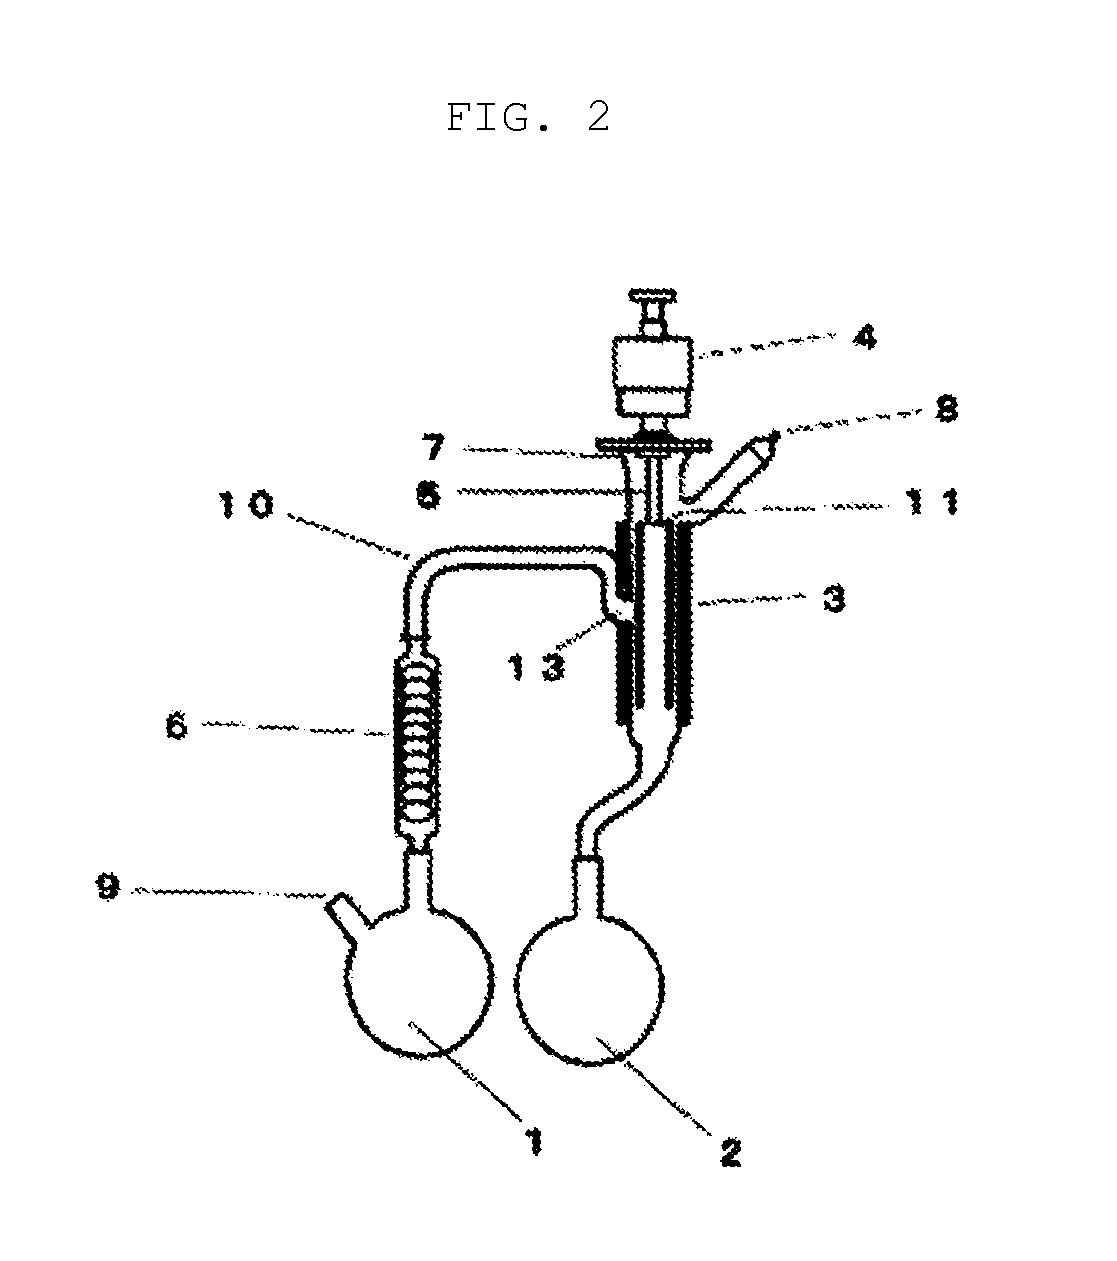 Vinyl sulfonic acid, polymer thereof, and production method thereof